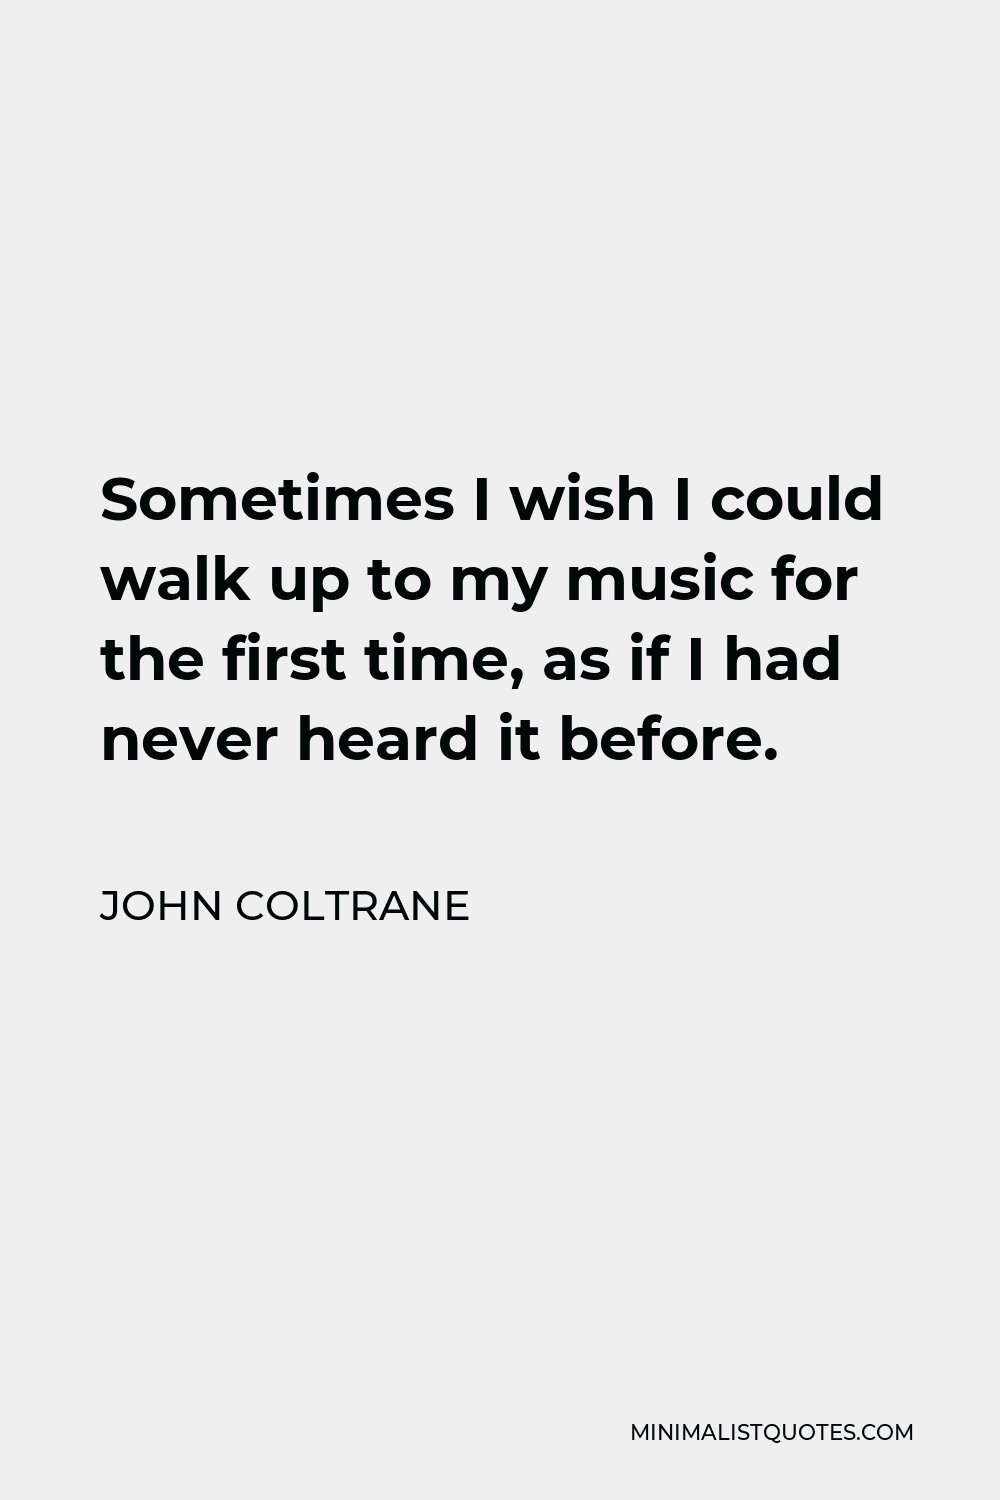 John Coltrane Quote - Sometimes I wish I could walk up to my music as if for the first time, as if I had never heard it before. Being so inescapably a part of it, I’ll never know what the listener gets, what the listener feels, and that’s too bad.